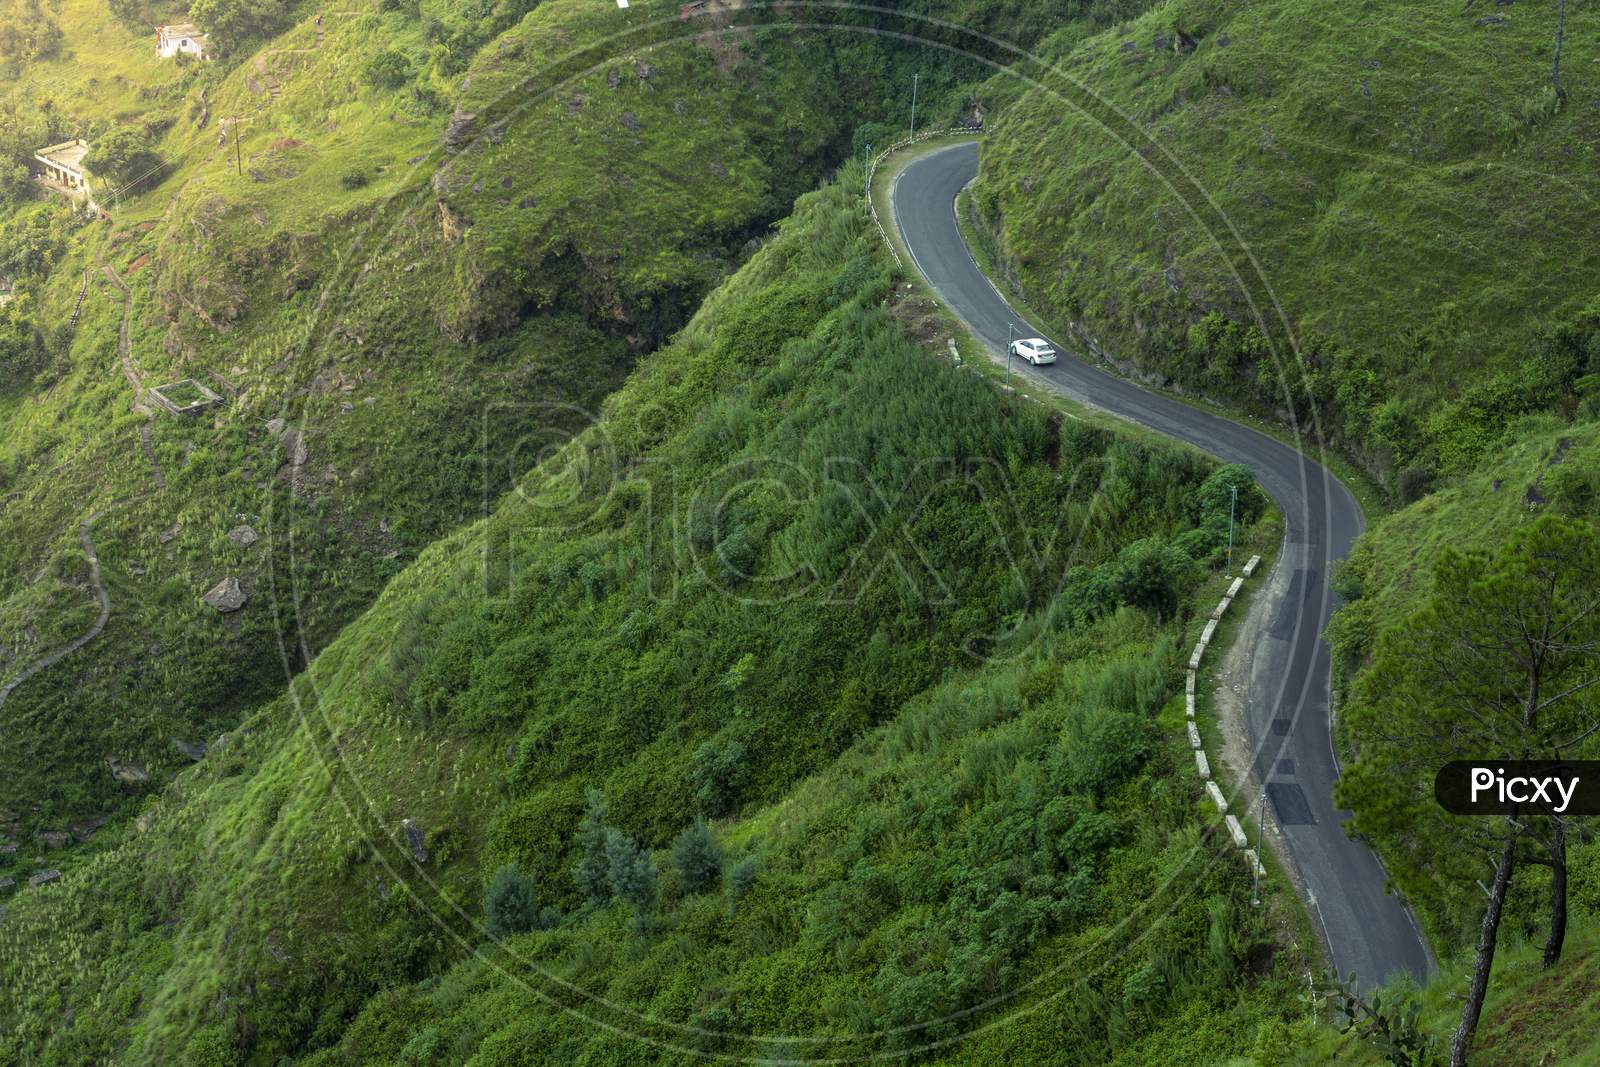 A Road In The Green Mountains With A Car.